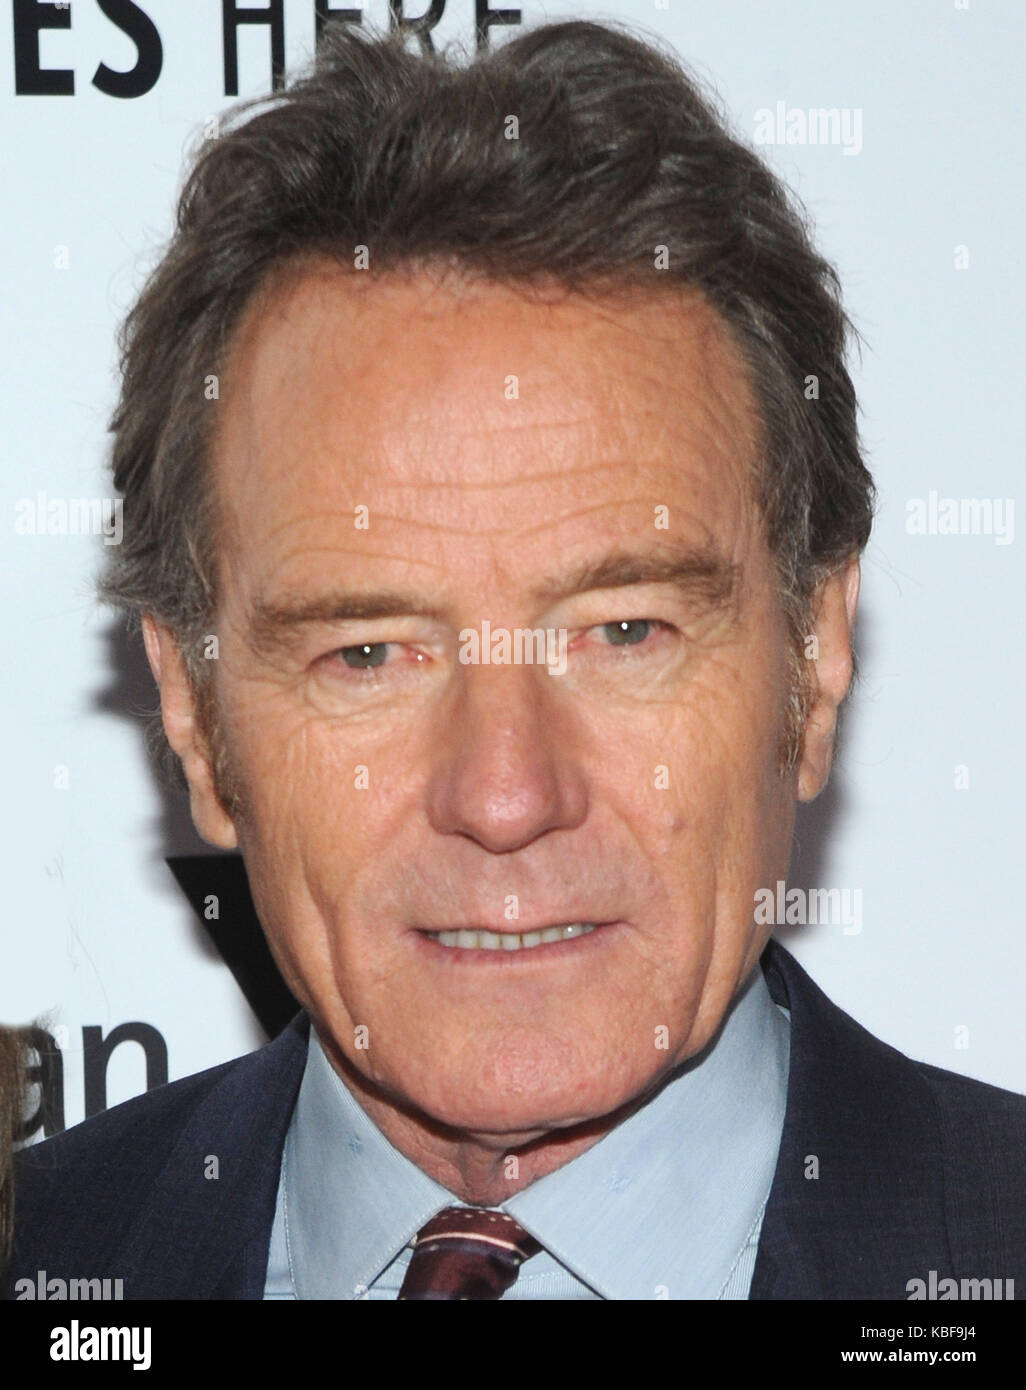 New York, NY, USA. 28th Sep, 2017. Bryan Cranston attends 55th New York Film Festival opening night premiere of 'Last Flag Flying' at Alice Tully Hall, Lincoln Center on September 28, 2017 in New York City. Credit: John Palmer/Media Punch/Alamy Live News Stock Photo